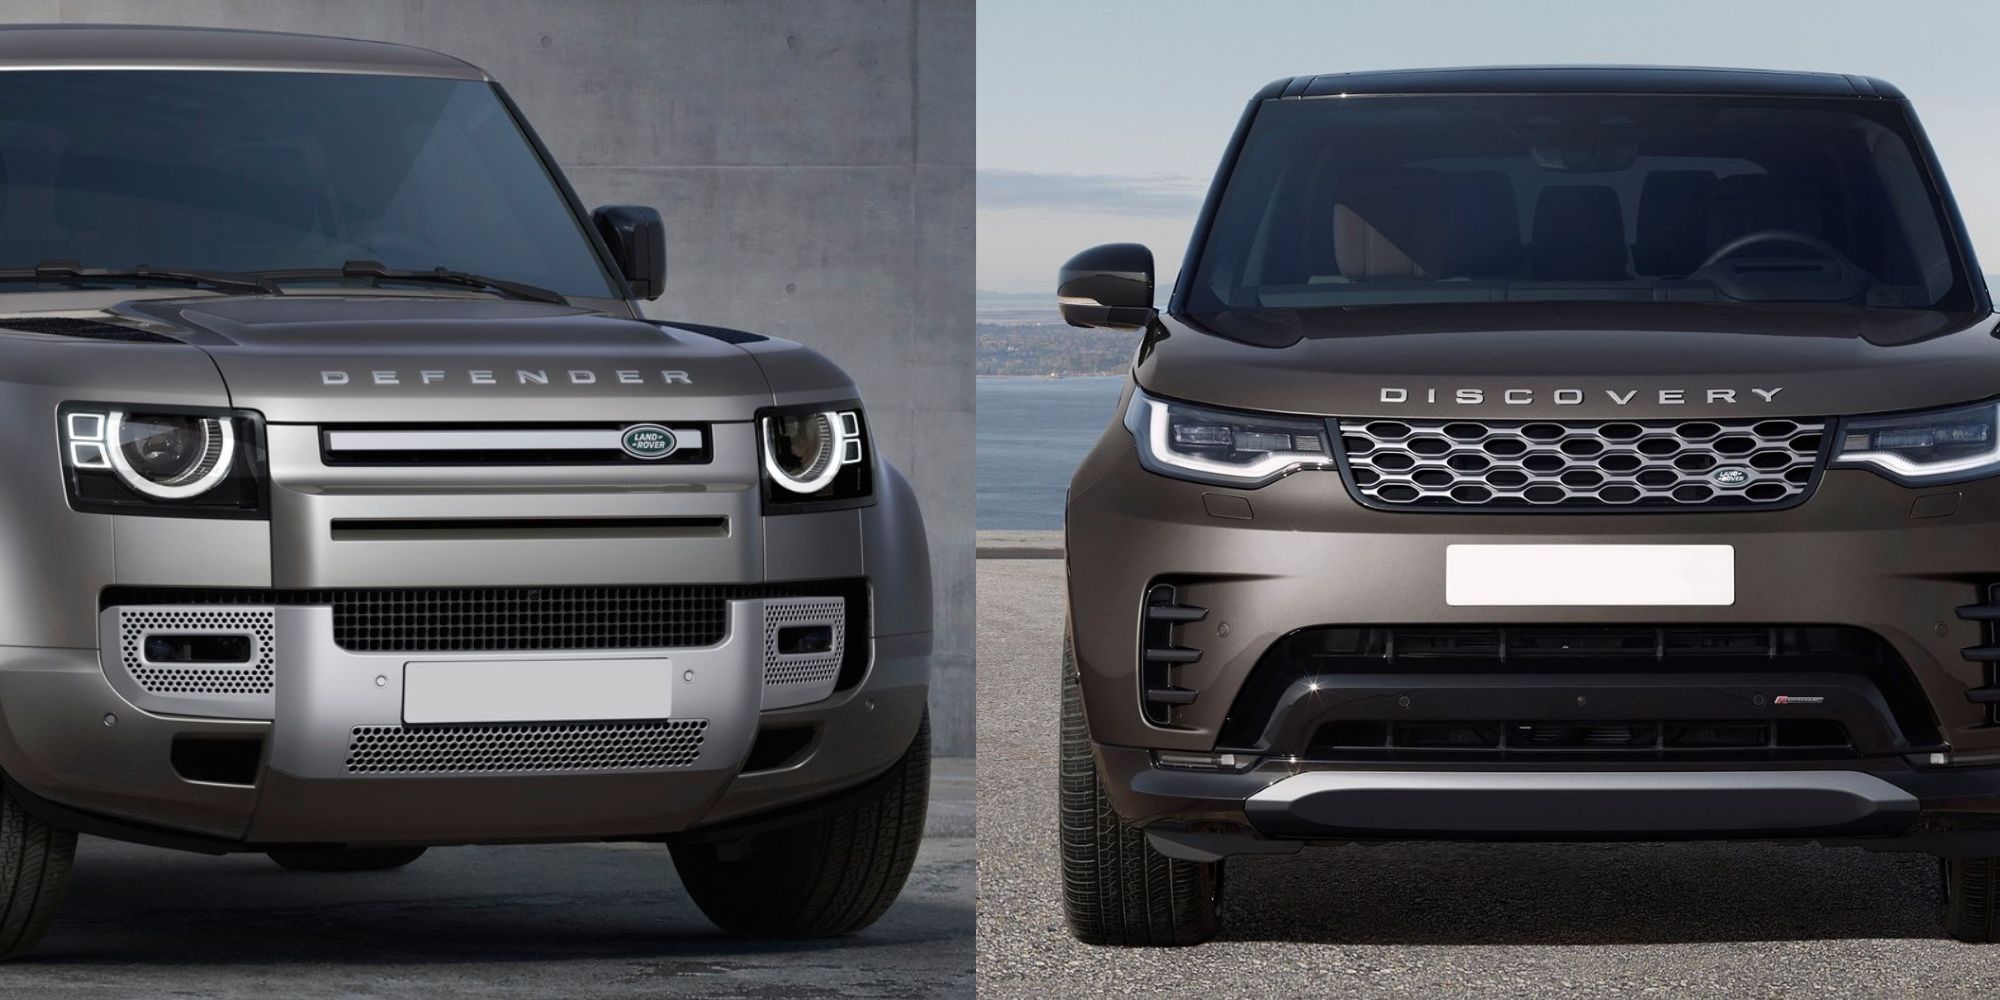 Land Rover Discovery vs Land Rover Defender: What’s the difference? image